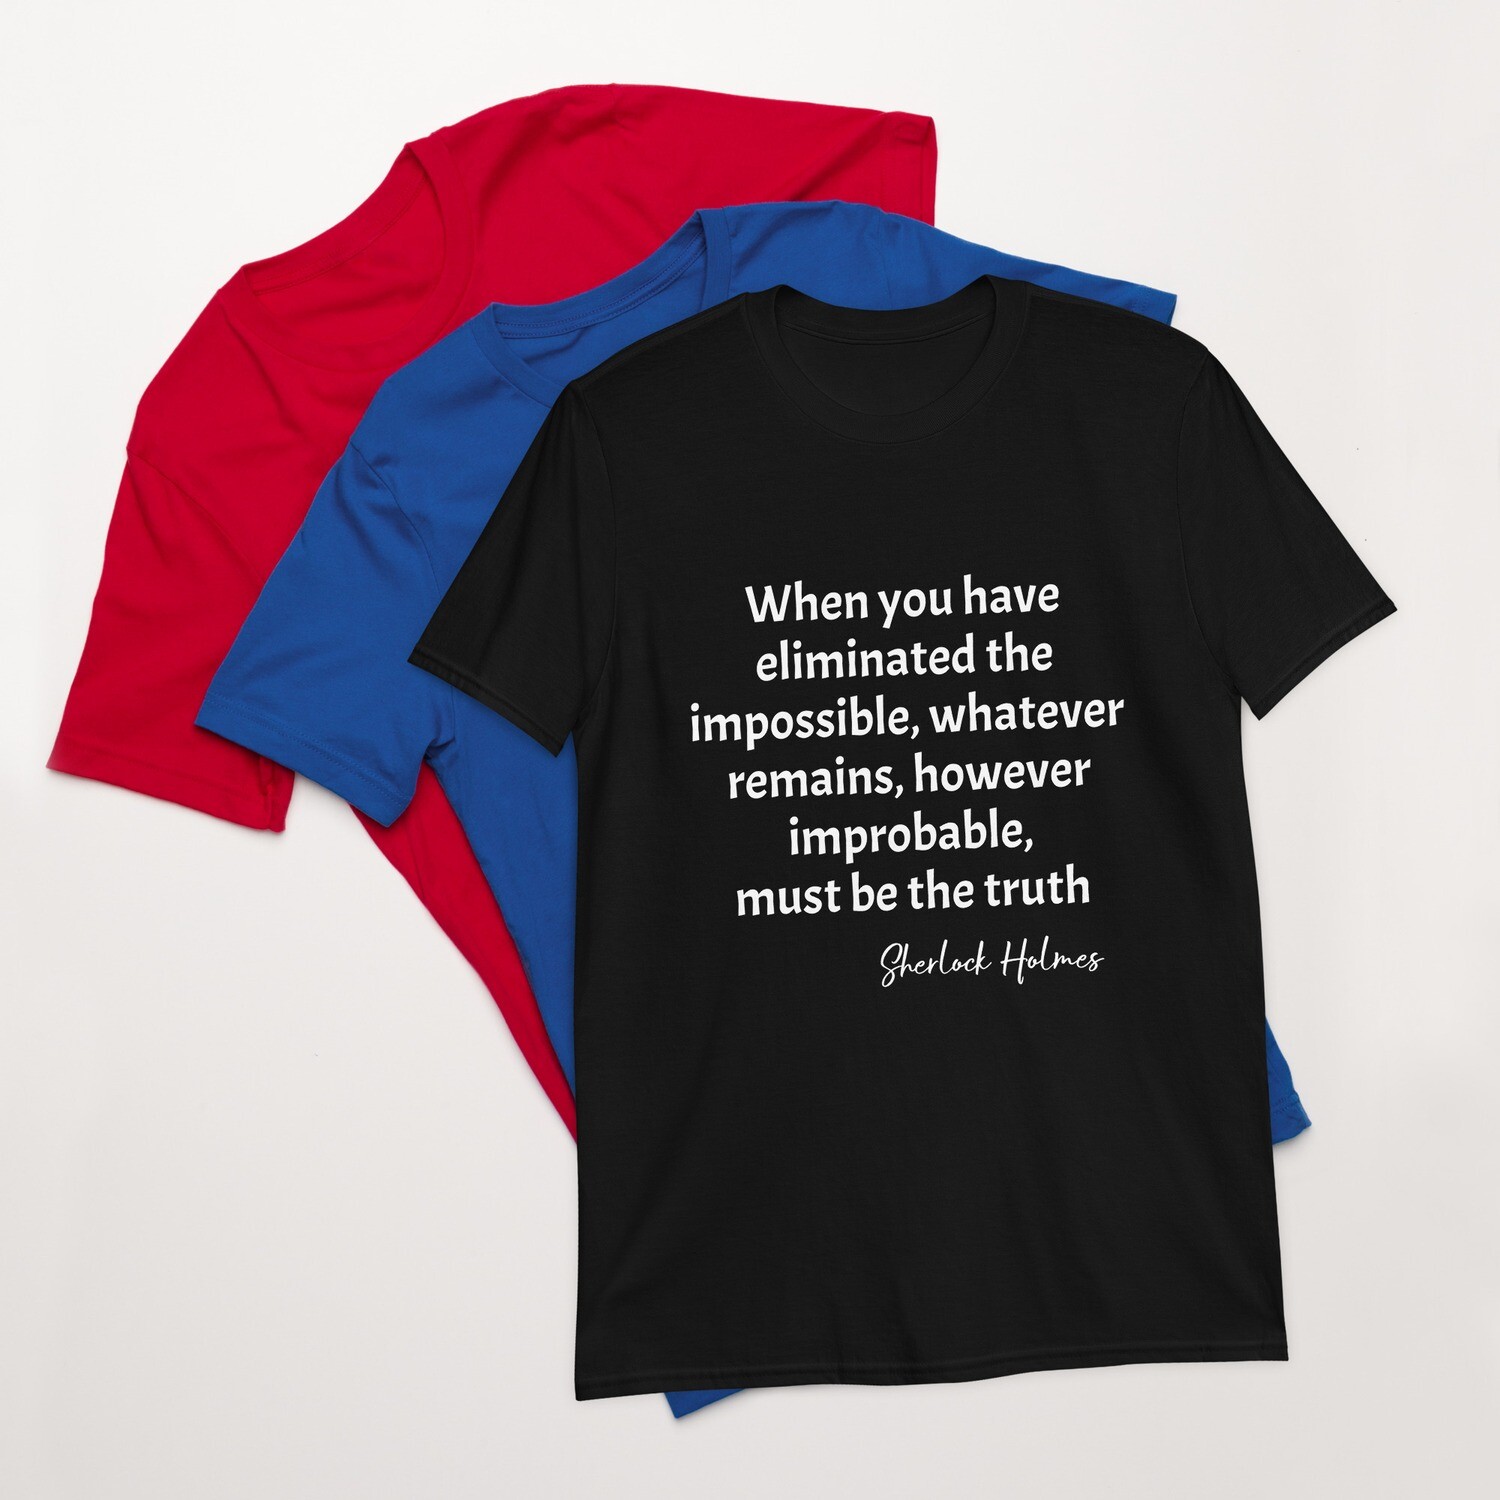 When you h ave eliminated the impossible... Sherlock Holmes Quote Short-Sleeve T-Shirt